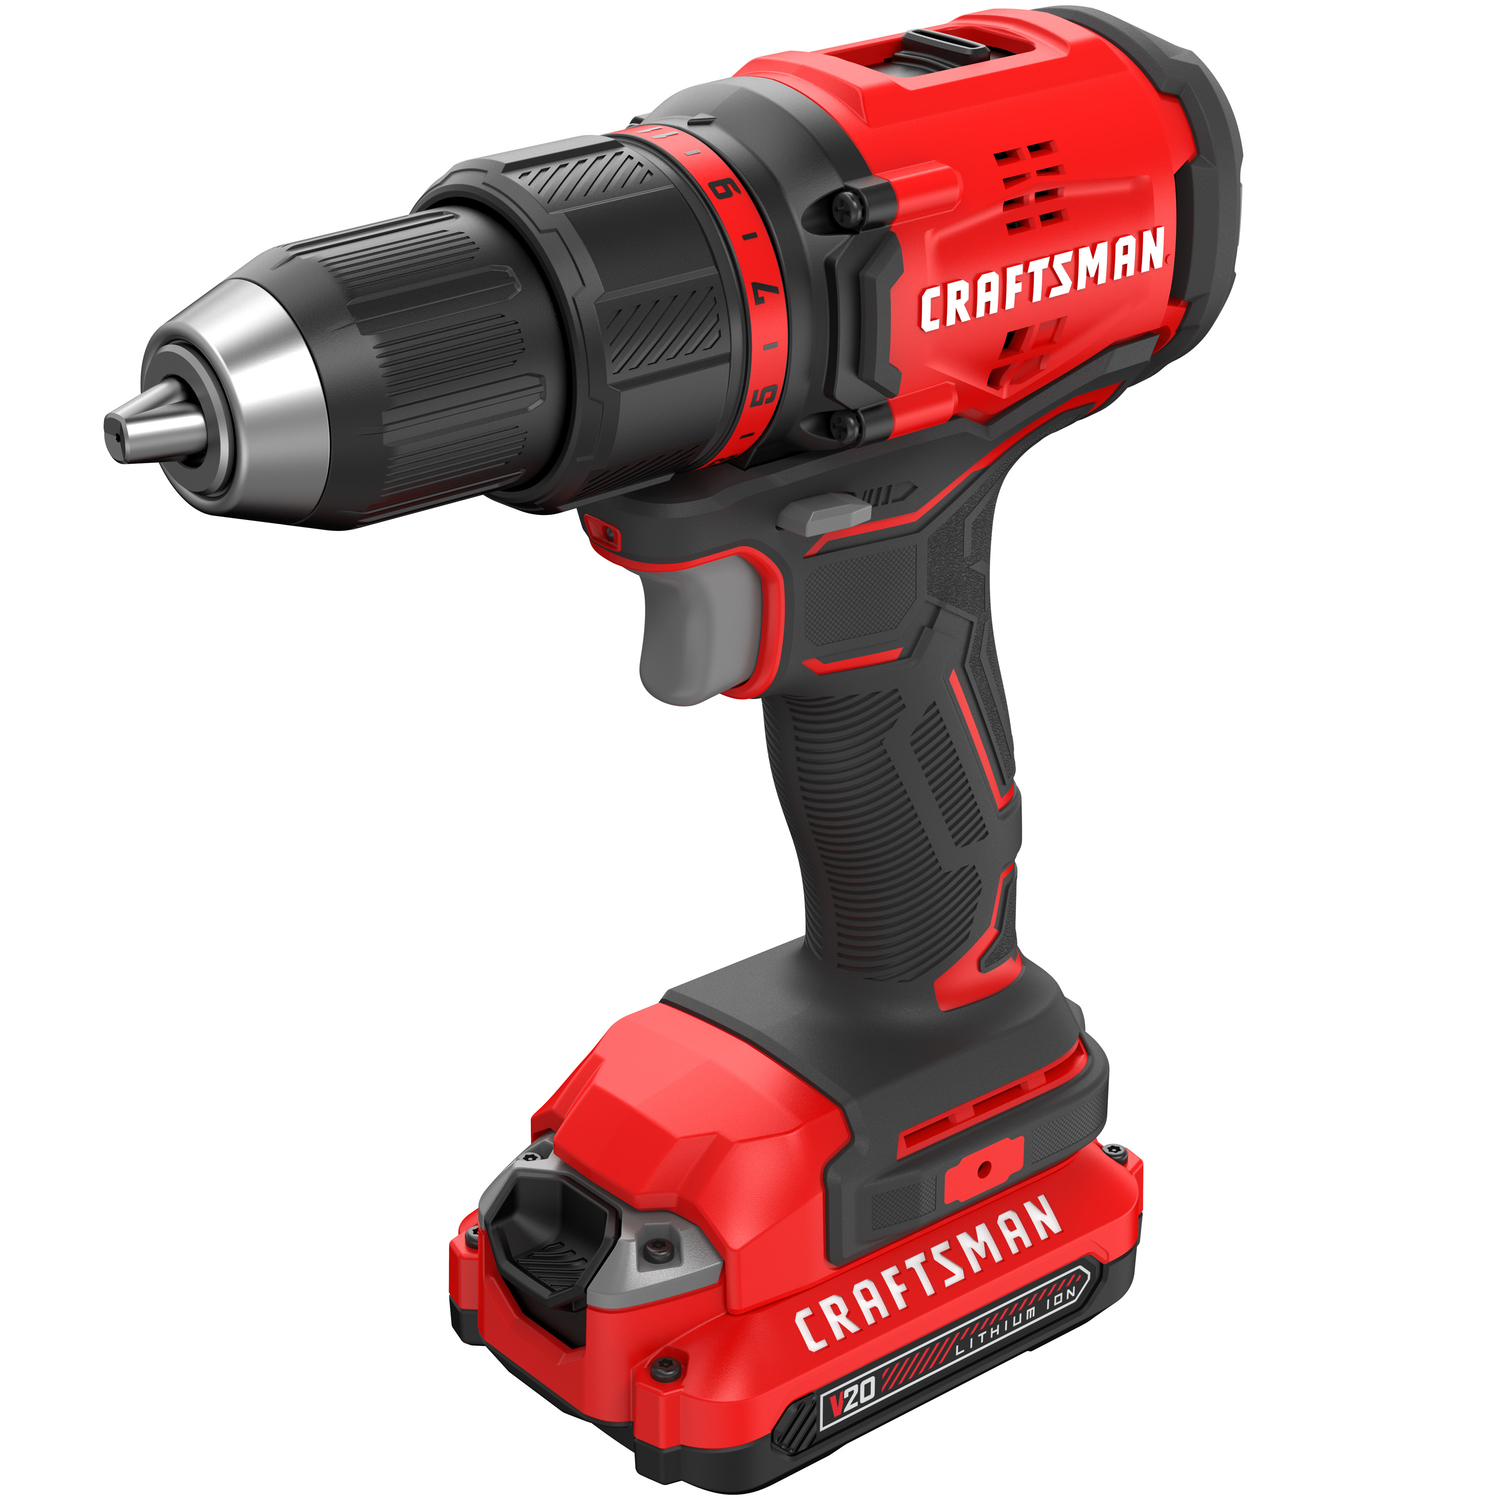 Craftsman 20 volt 1/2 in. Brushless Cordless Compact Drill Kit...